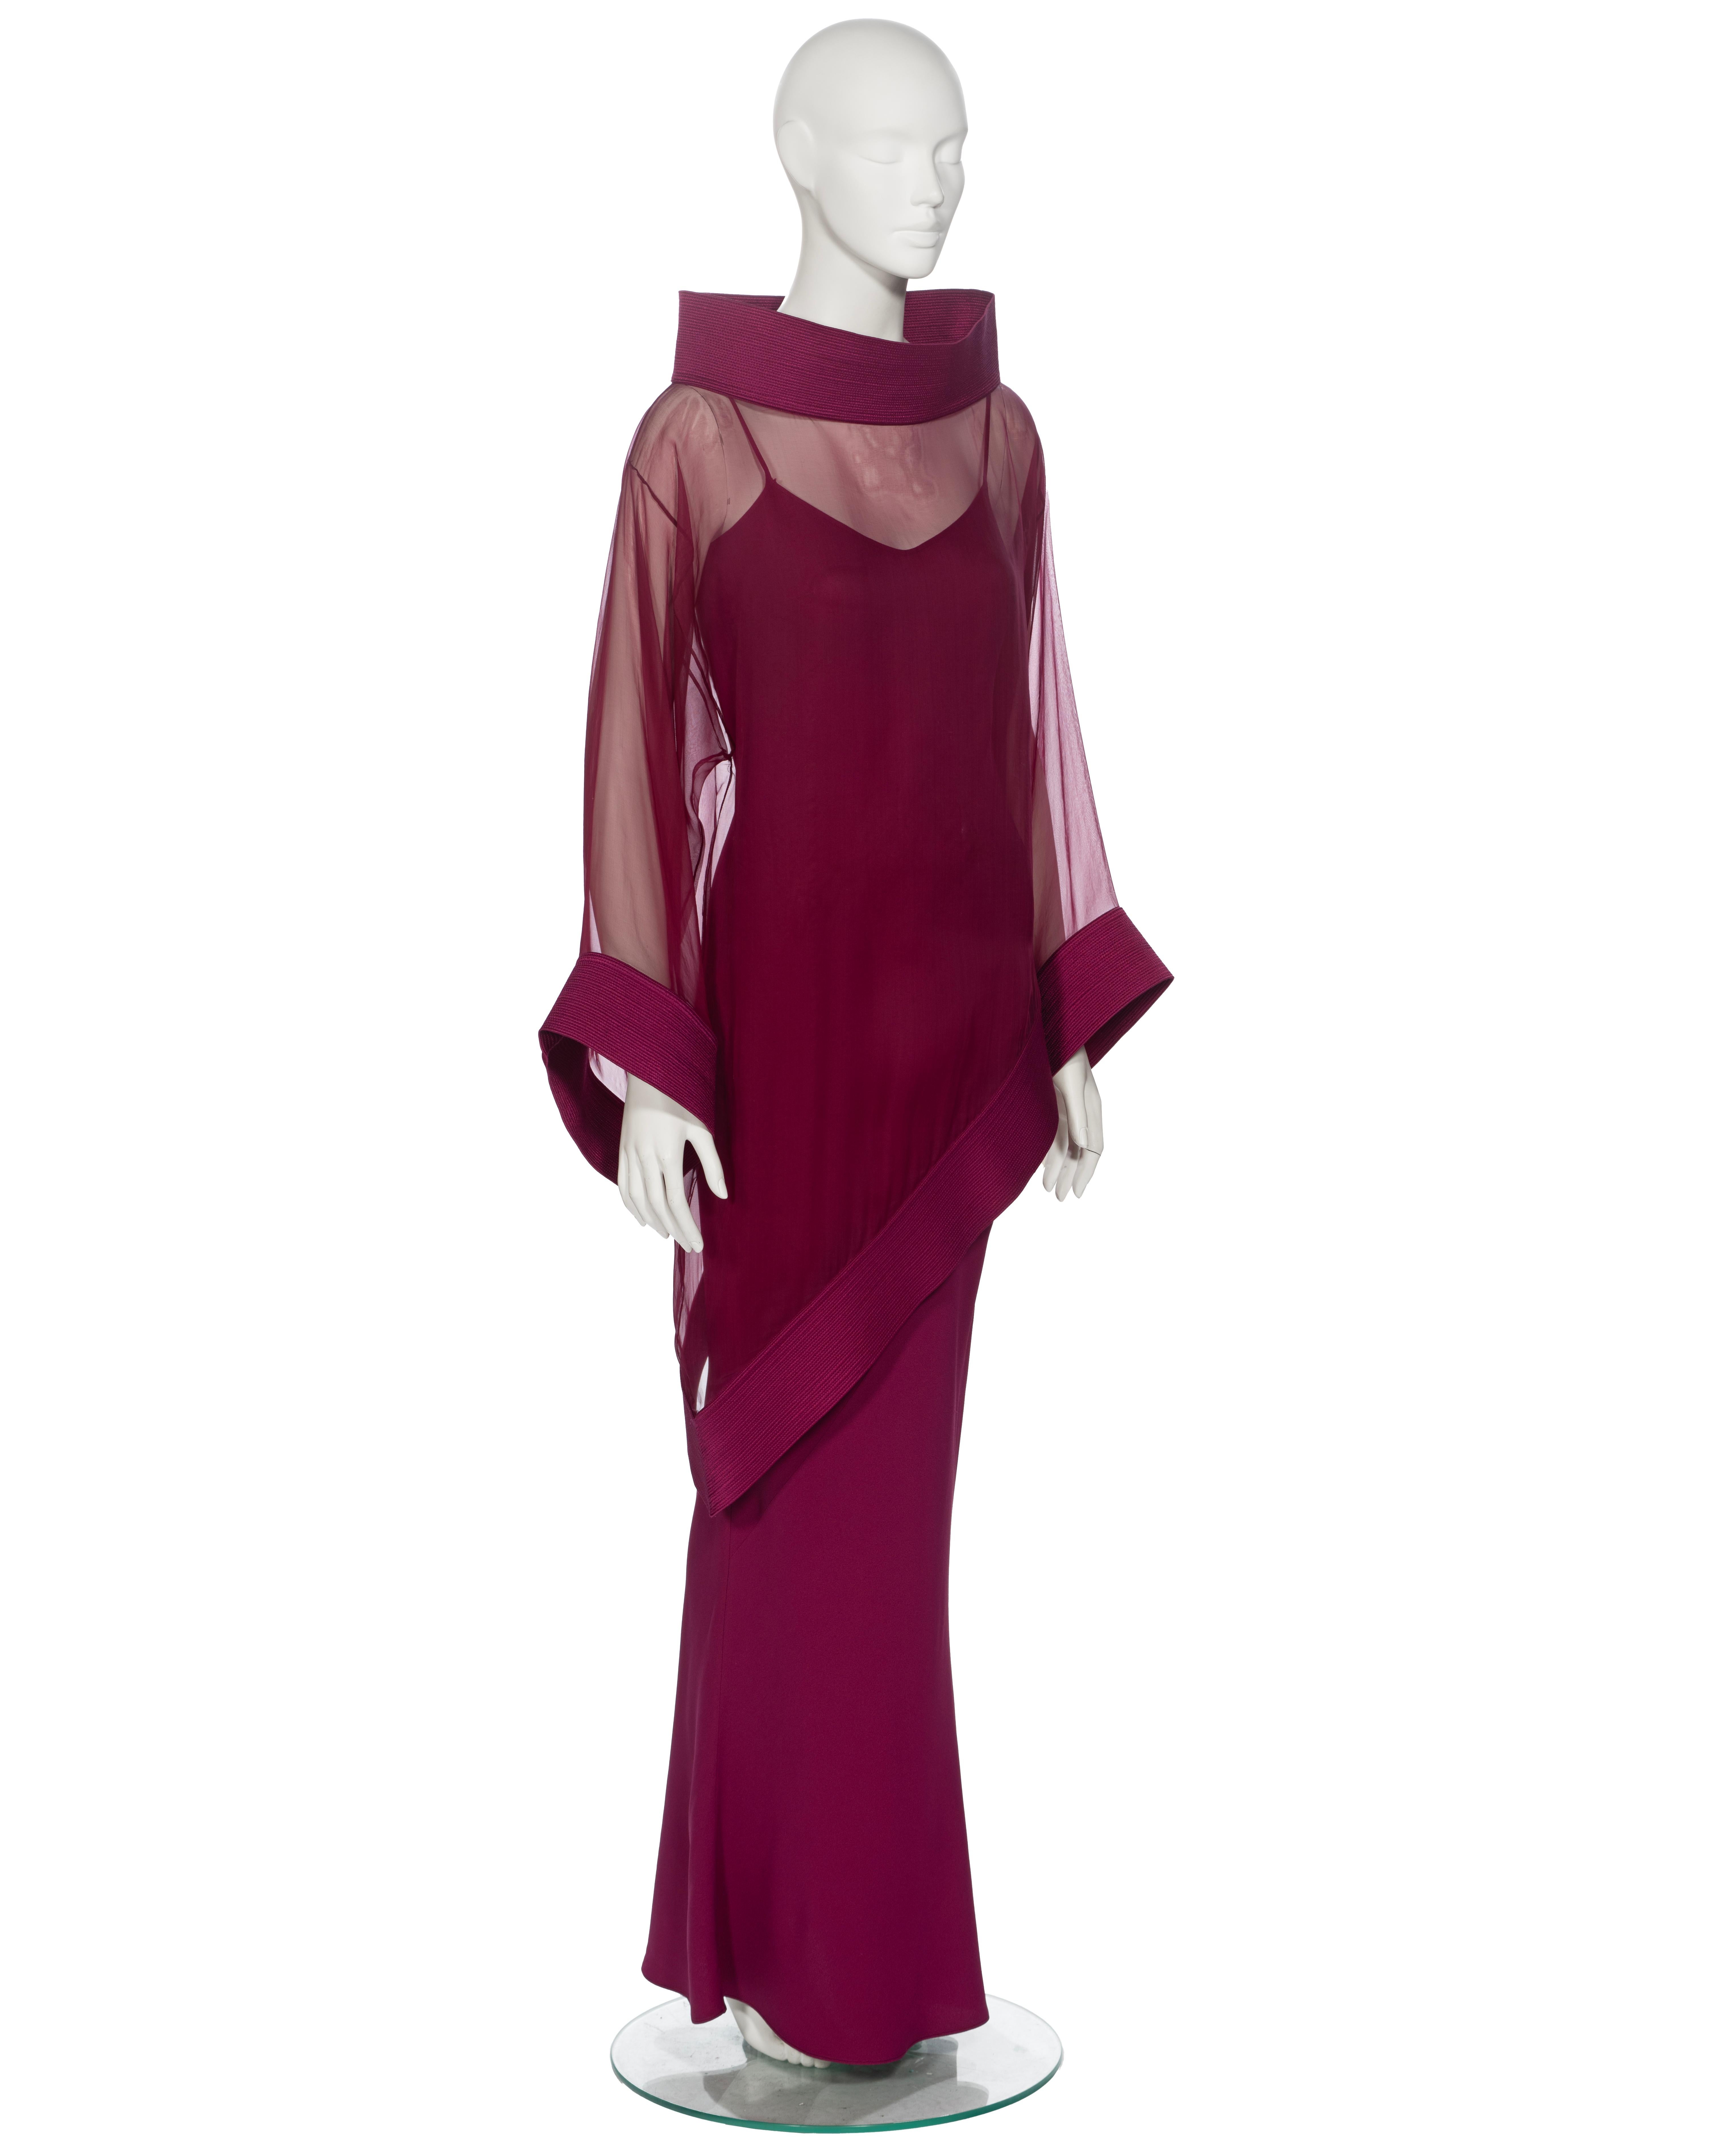 Women's Christian Dior by John Galliano Claret Evening Dress and Tunic Ensemble, fw 1999 For Sale